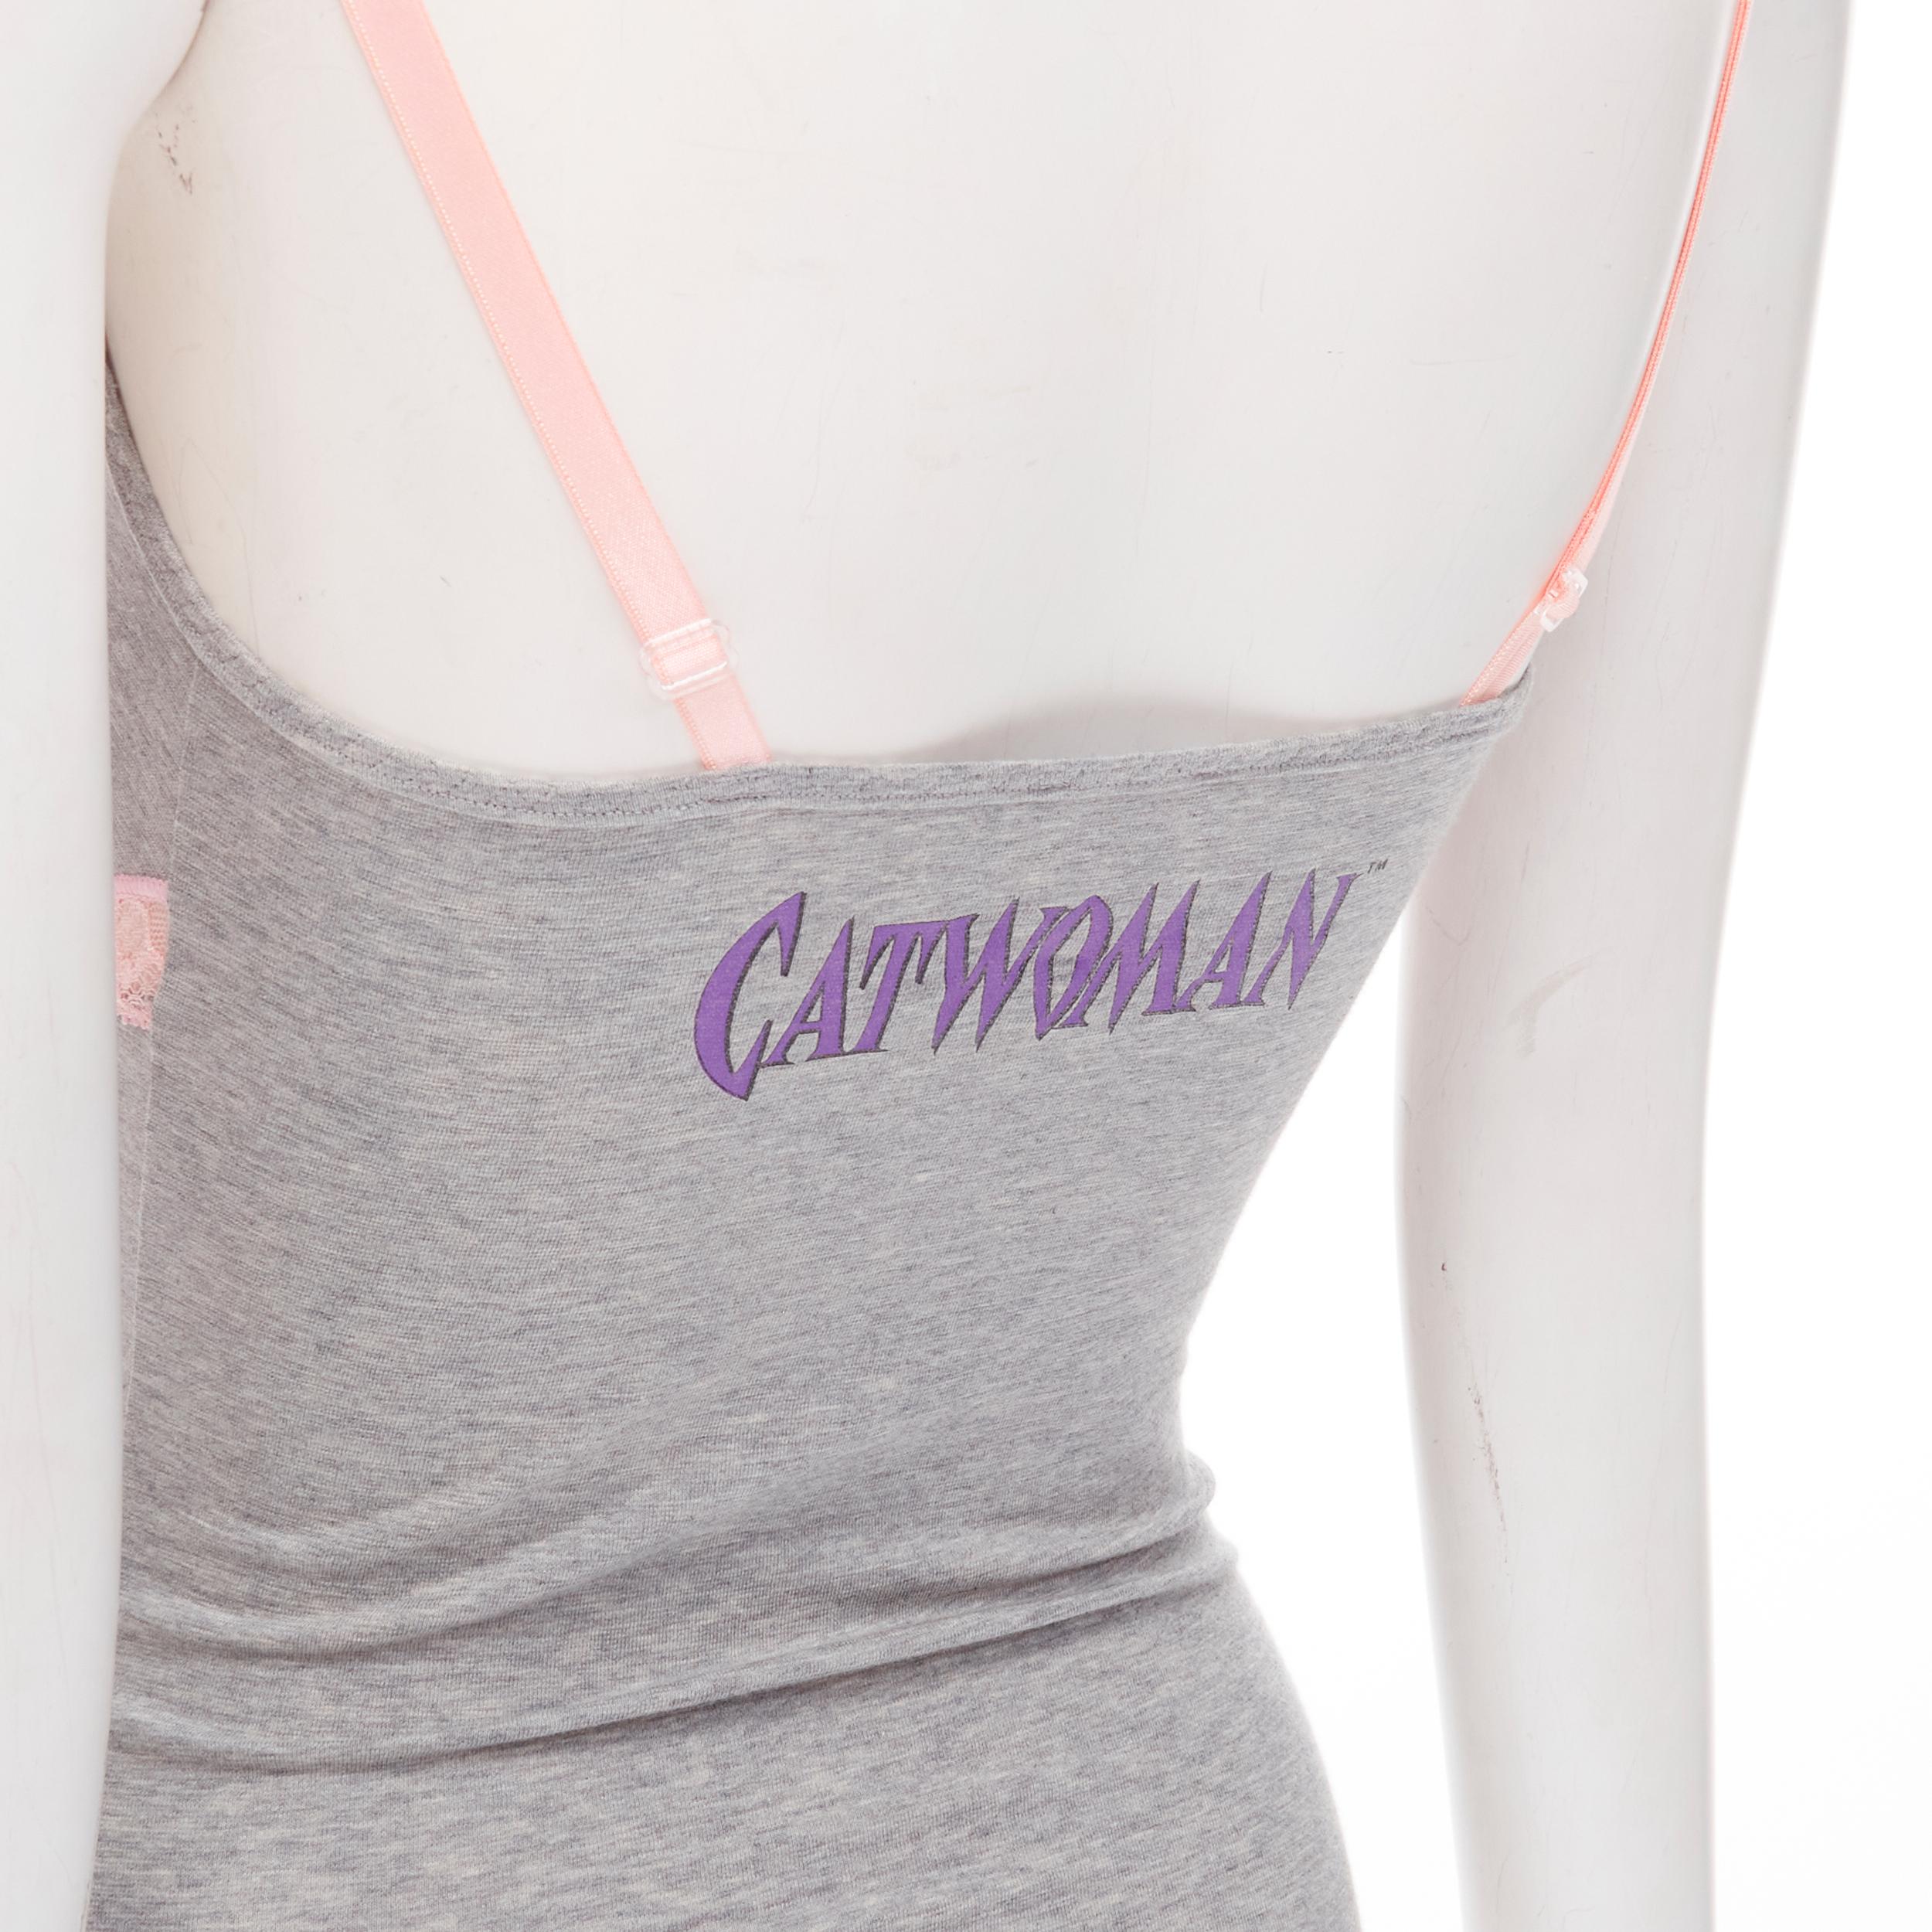 D&G DOLCE GABBANA Y2K Vintage grey Catwoman pink lace cami tank top XS 1